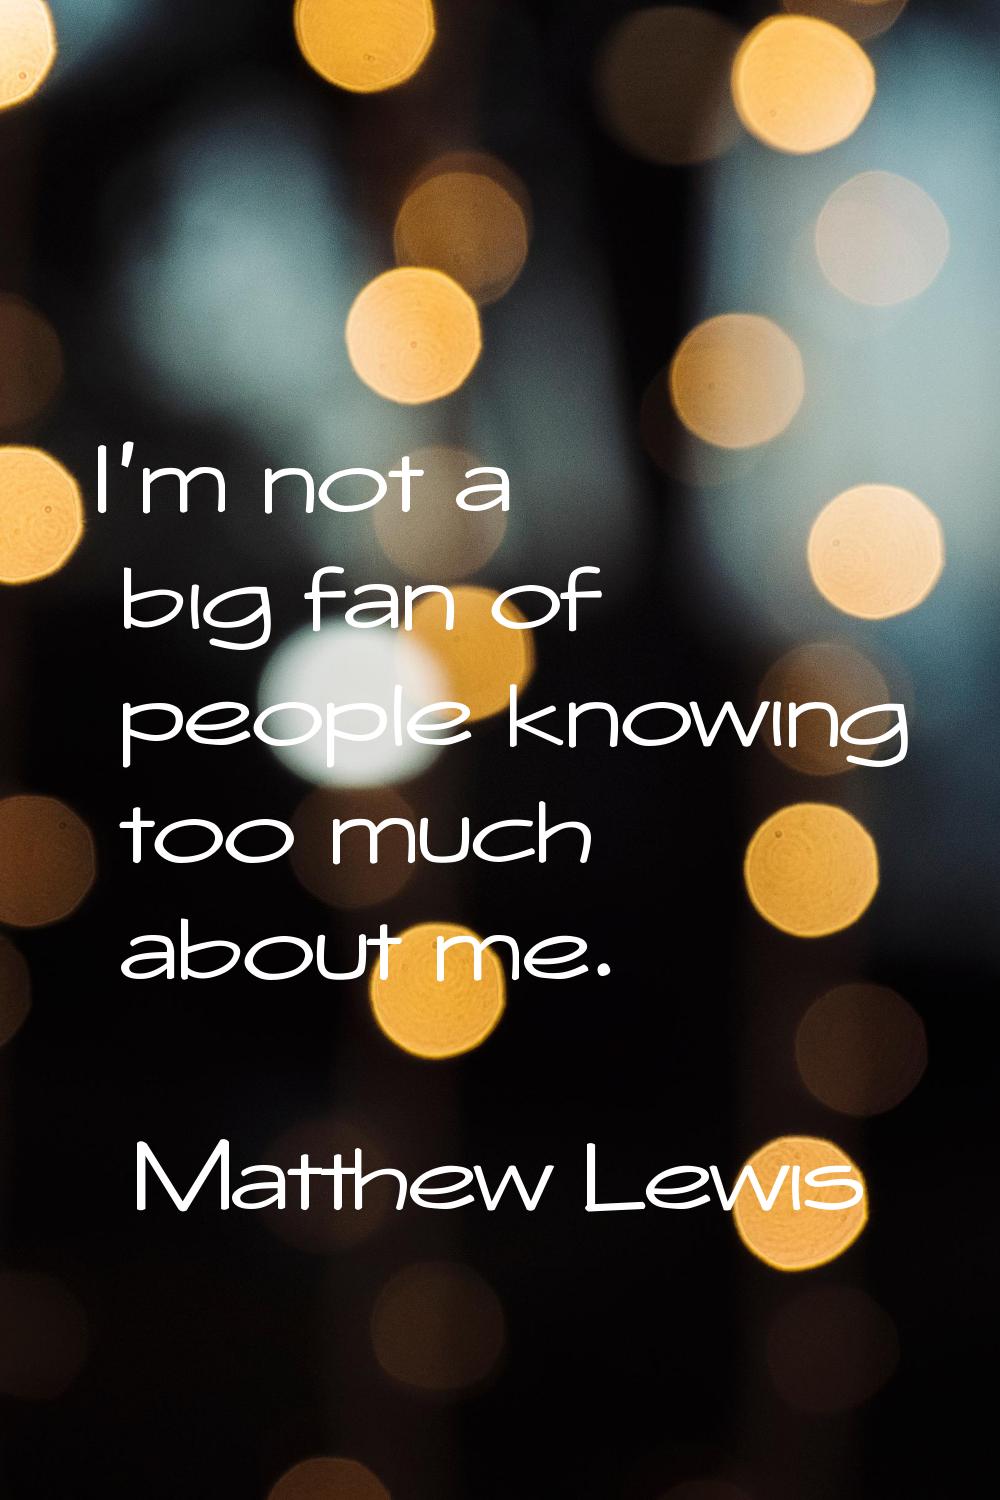 I'm not a big fan of people knowing too much about me.